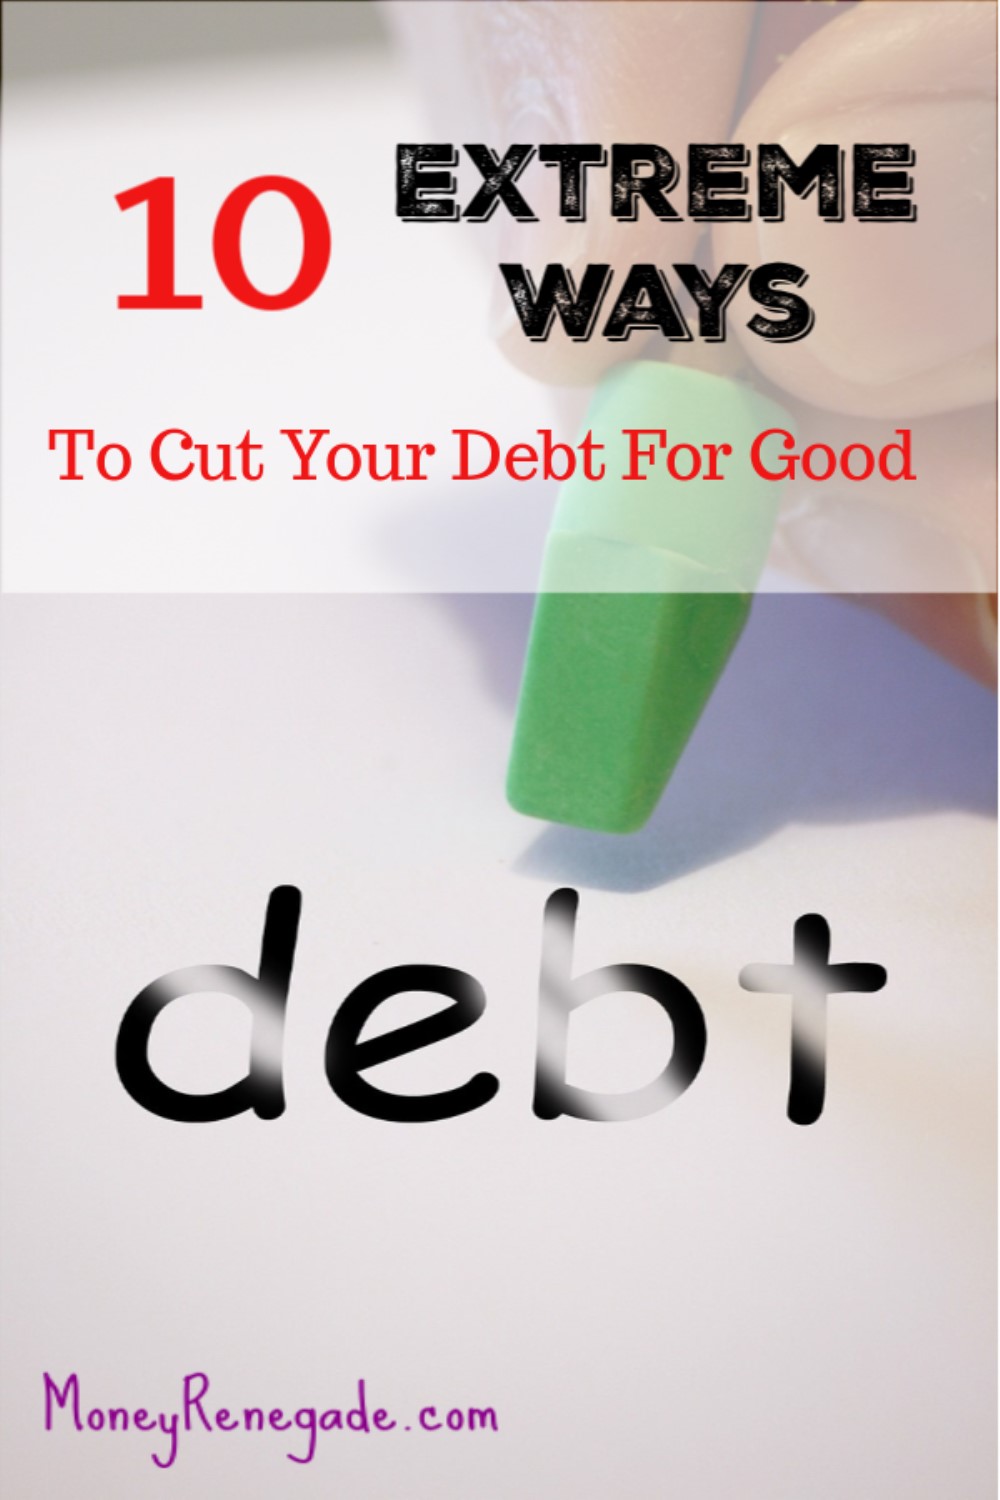 10 Extreme Ways To Cut Your Debt For Good